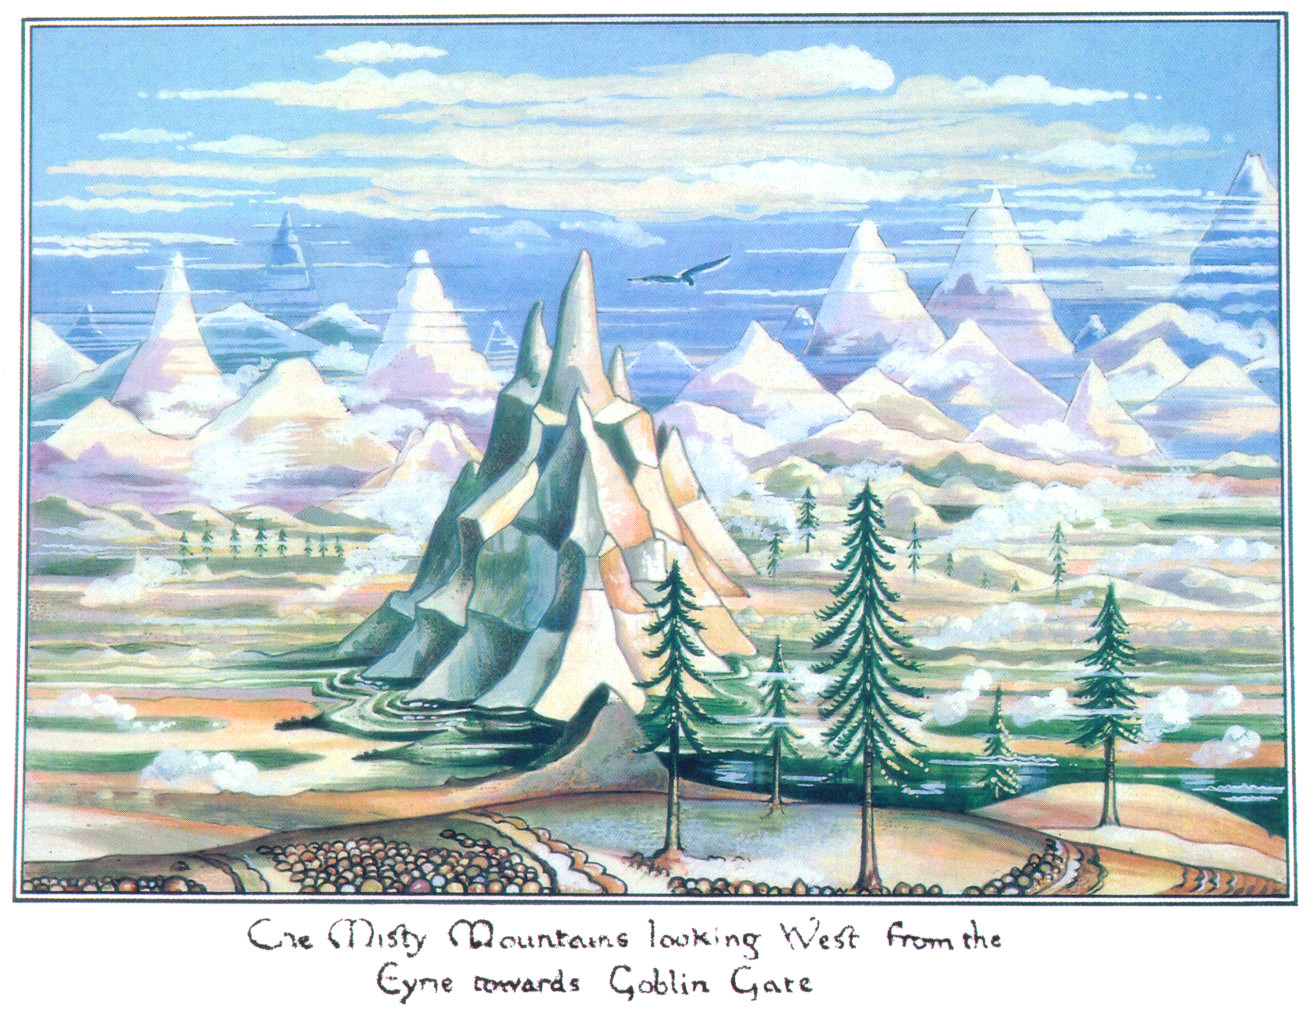 Fig. 4: Tolkien and Riddett 1976. The Misty Mountains looking West from the Eyrie towards Goblin Gate [colored drawing]. 